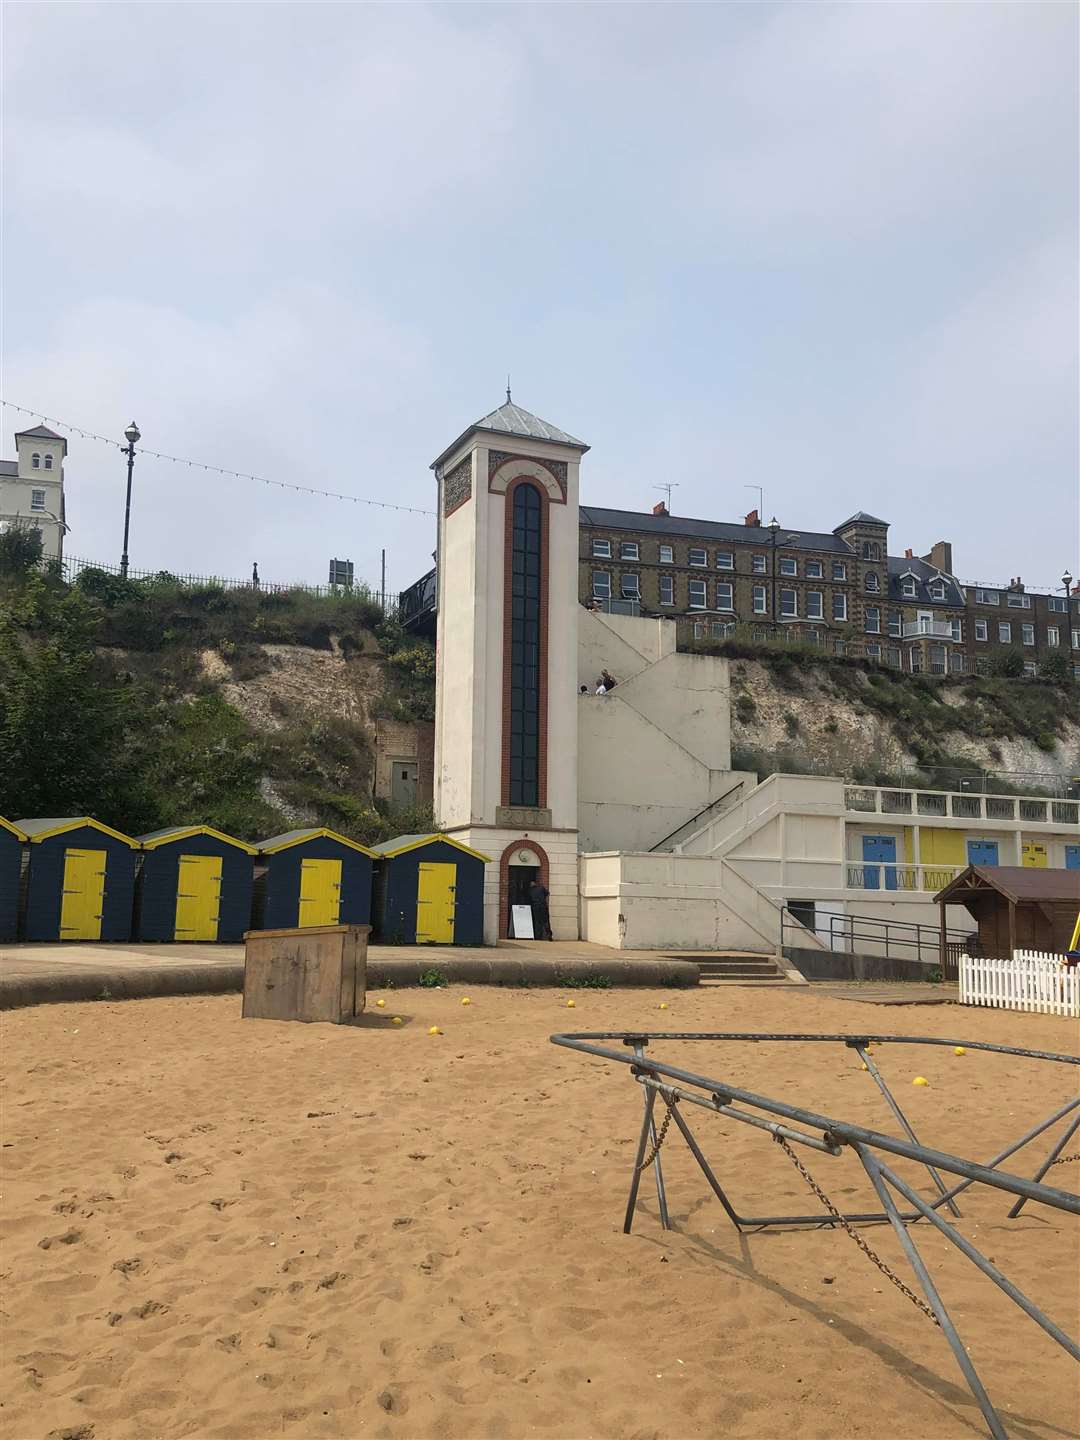 The Viking Bay lift in Broadstairs